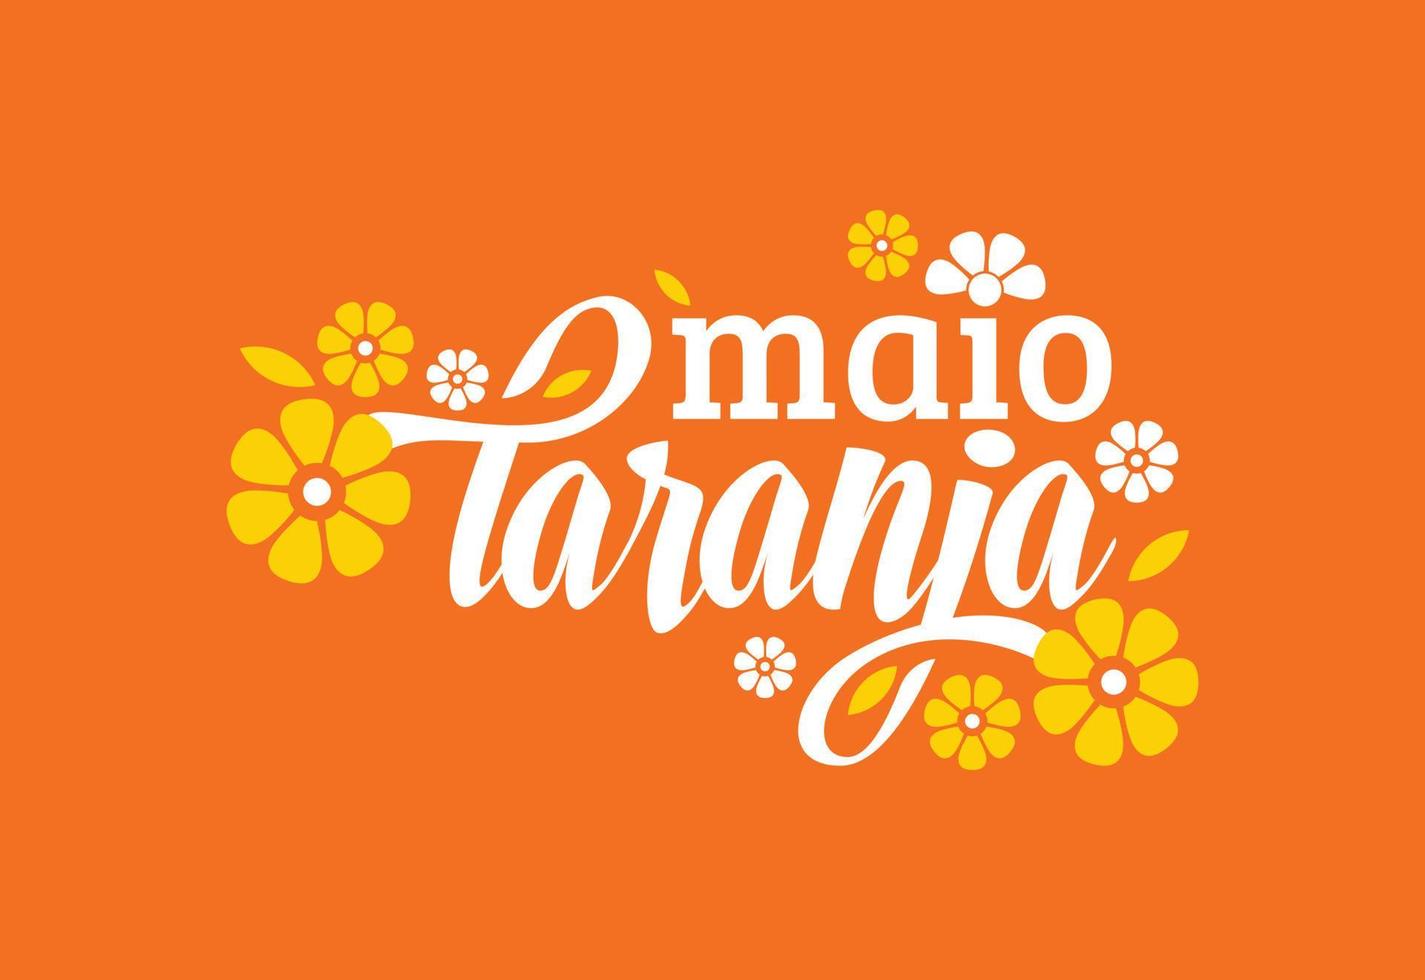 Maio laranja. May 18 is National Day Against Abuse and Exploitation of Children in Brazil vector